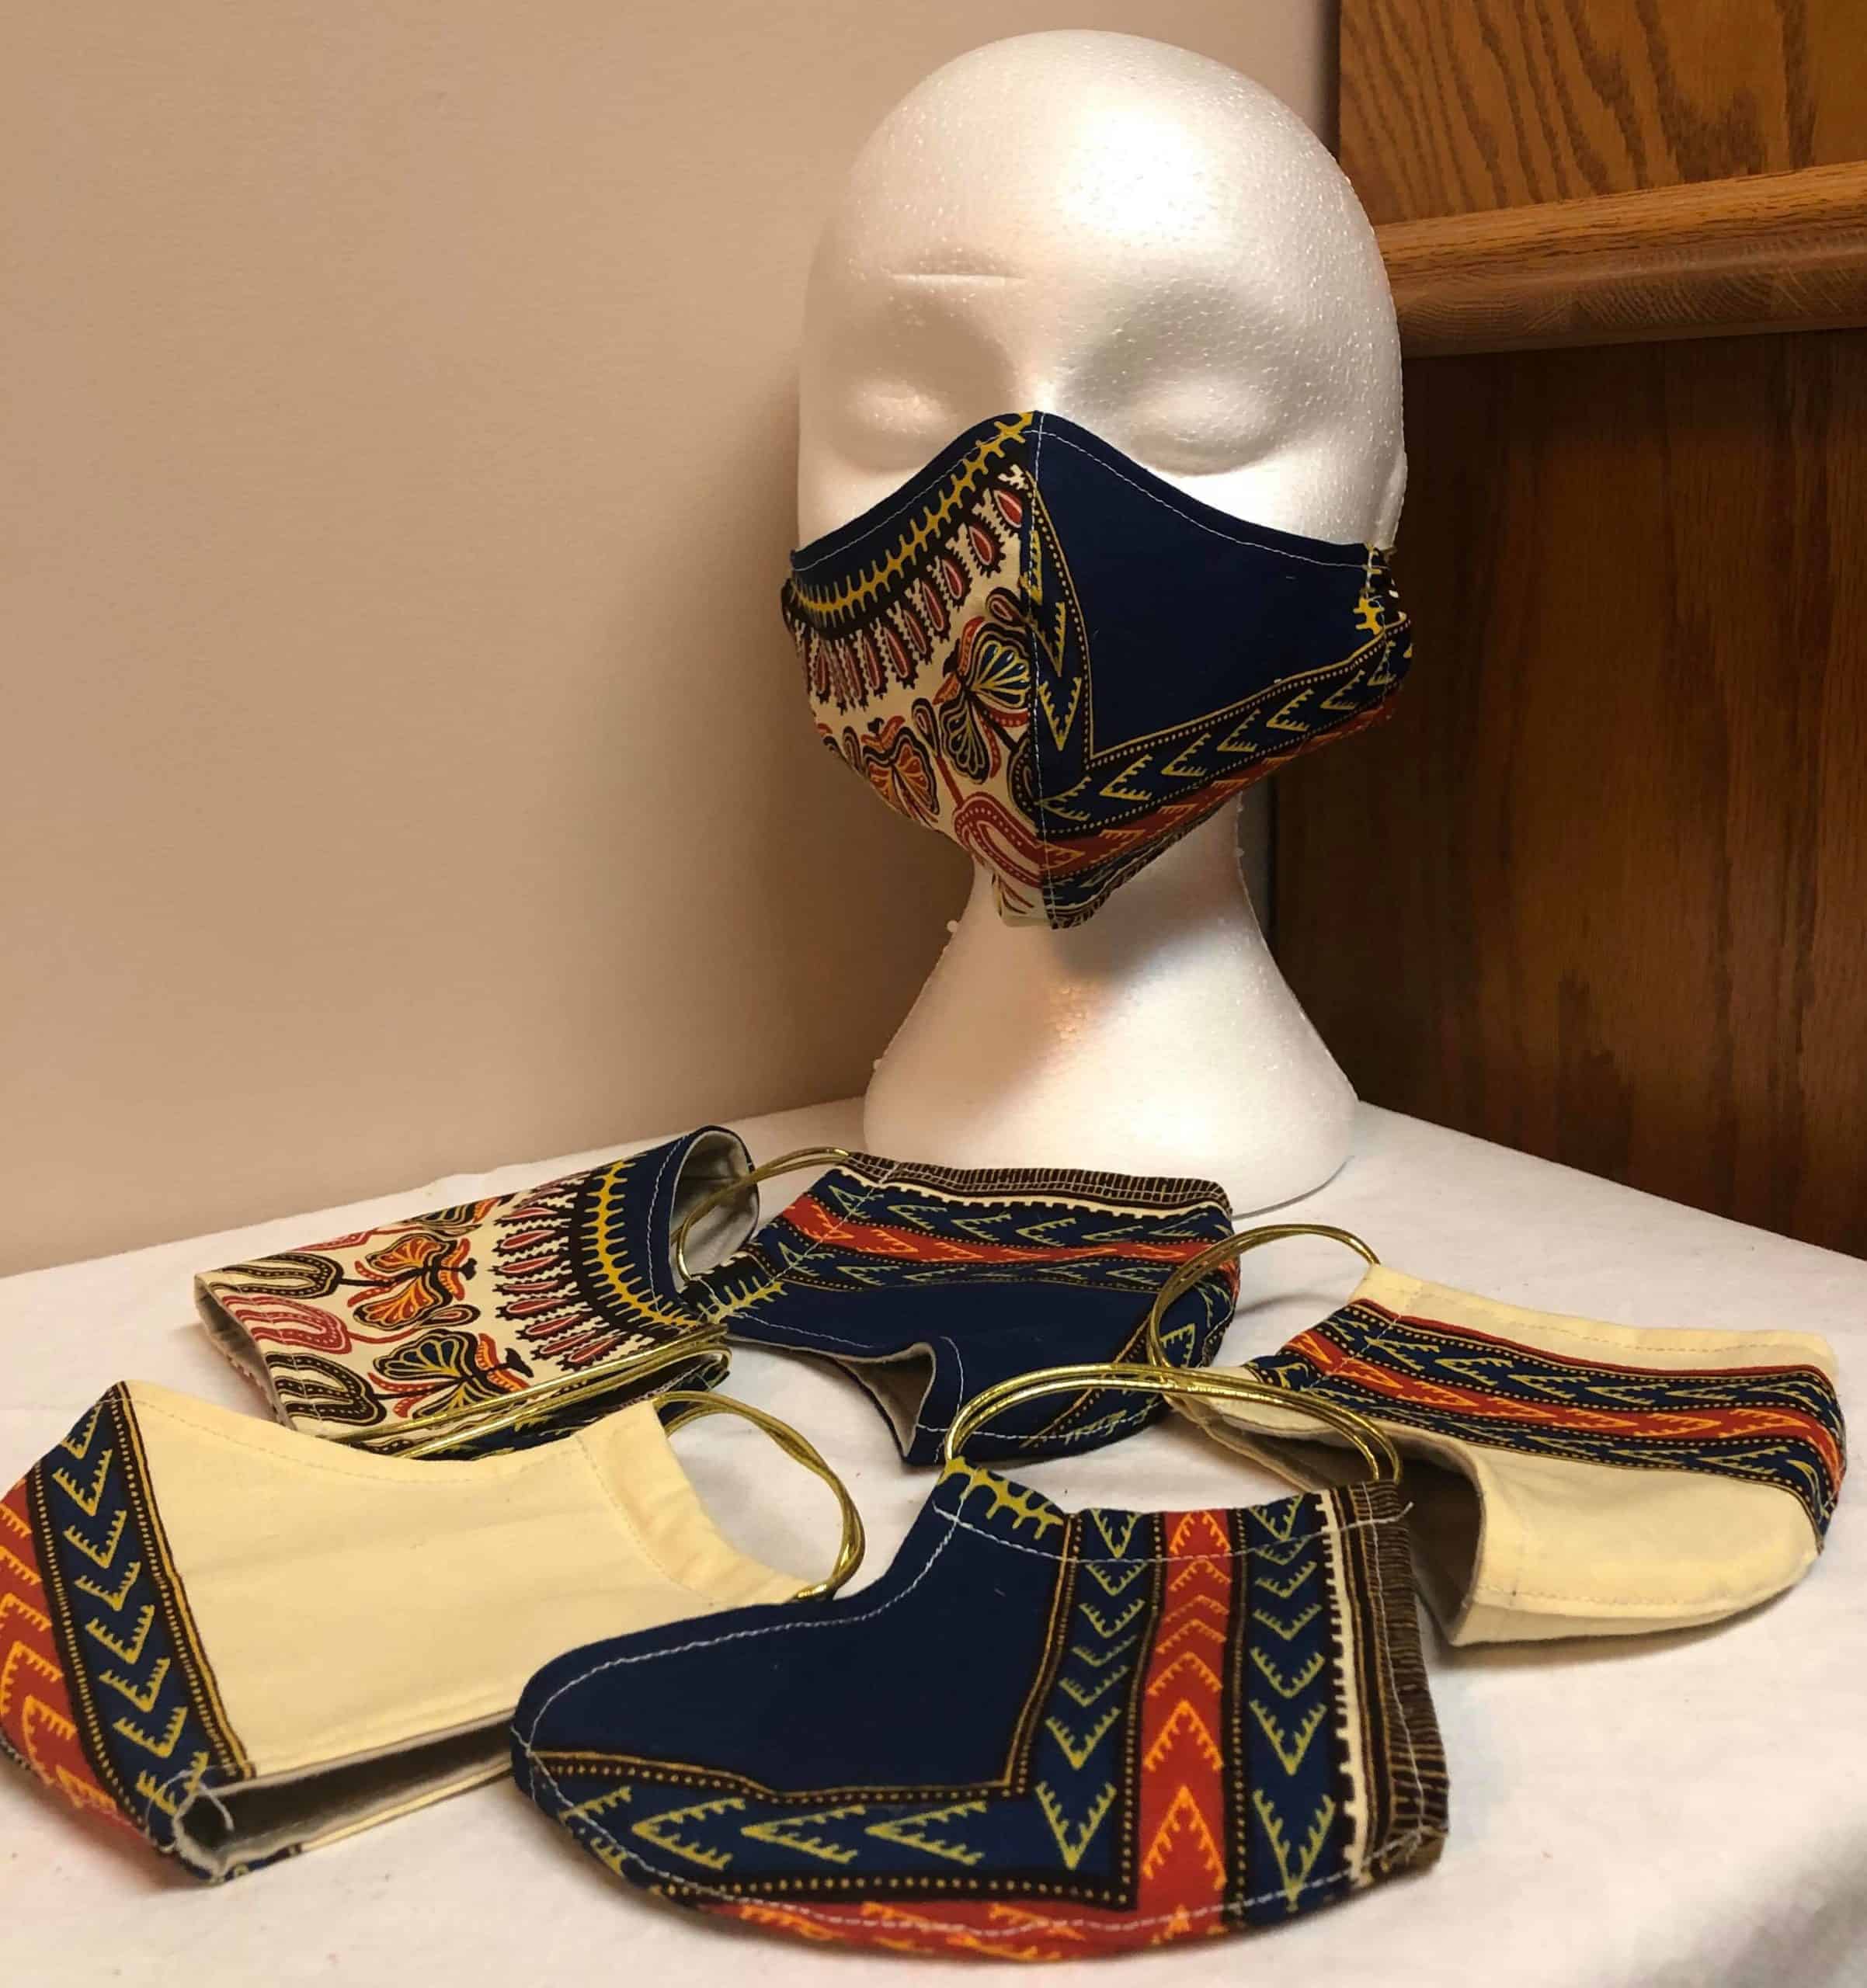 Westwood resident is selling fabric masks